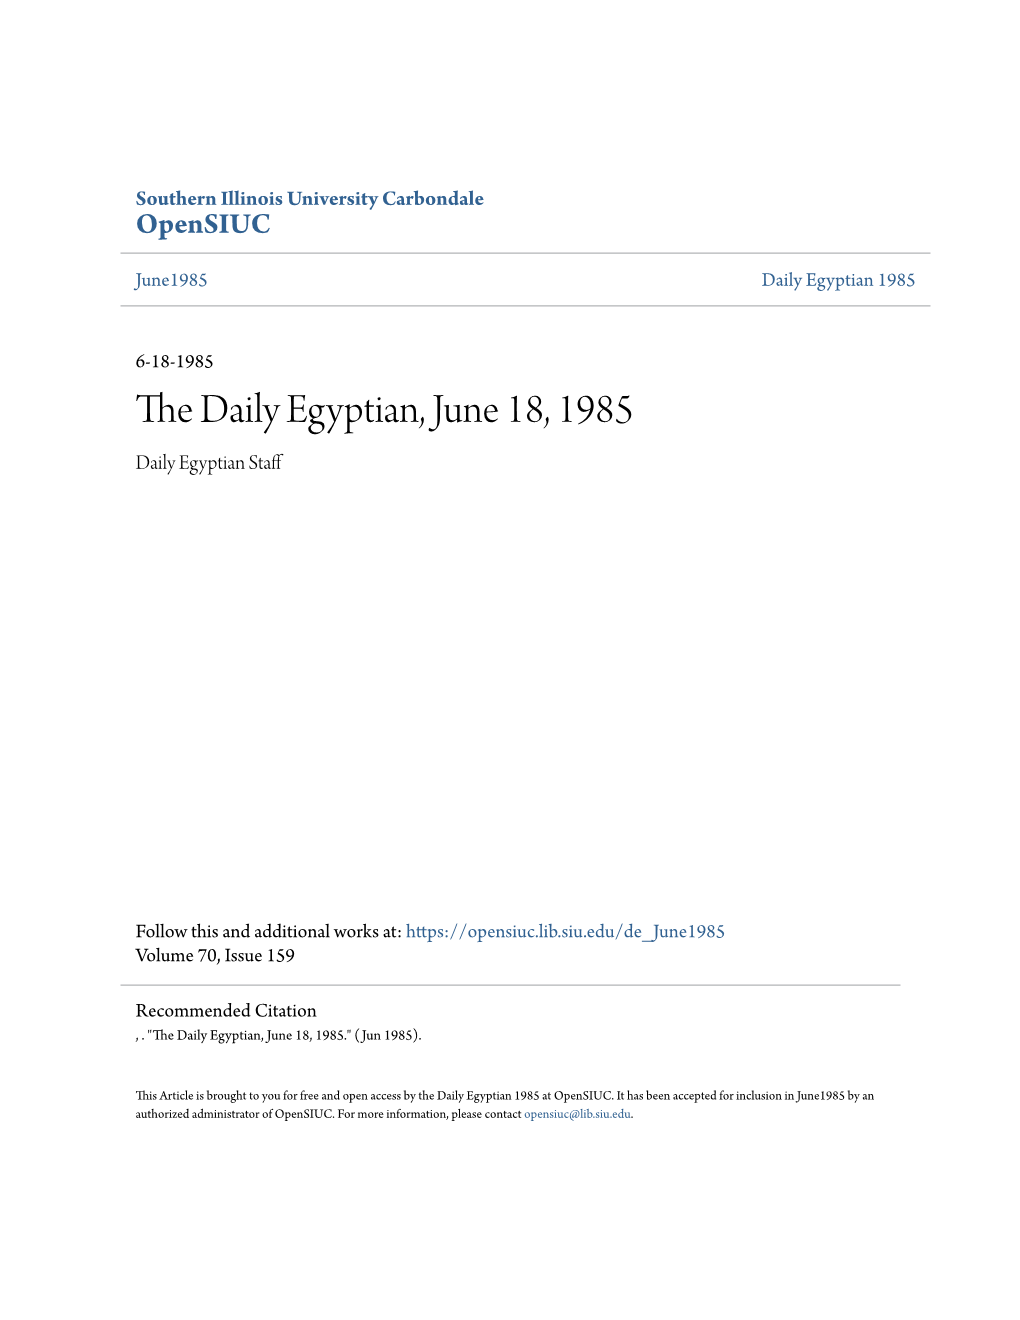 The Daily Egyptian, June 18, 1985